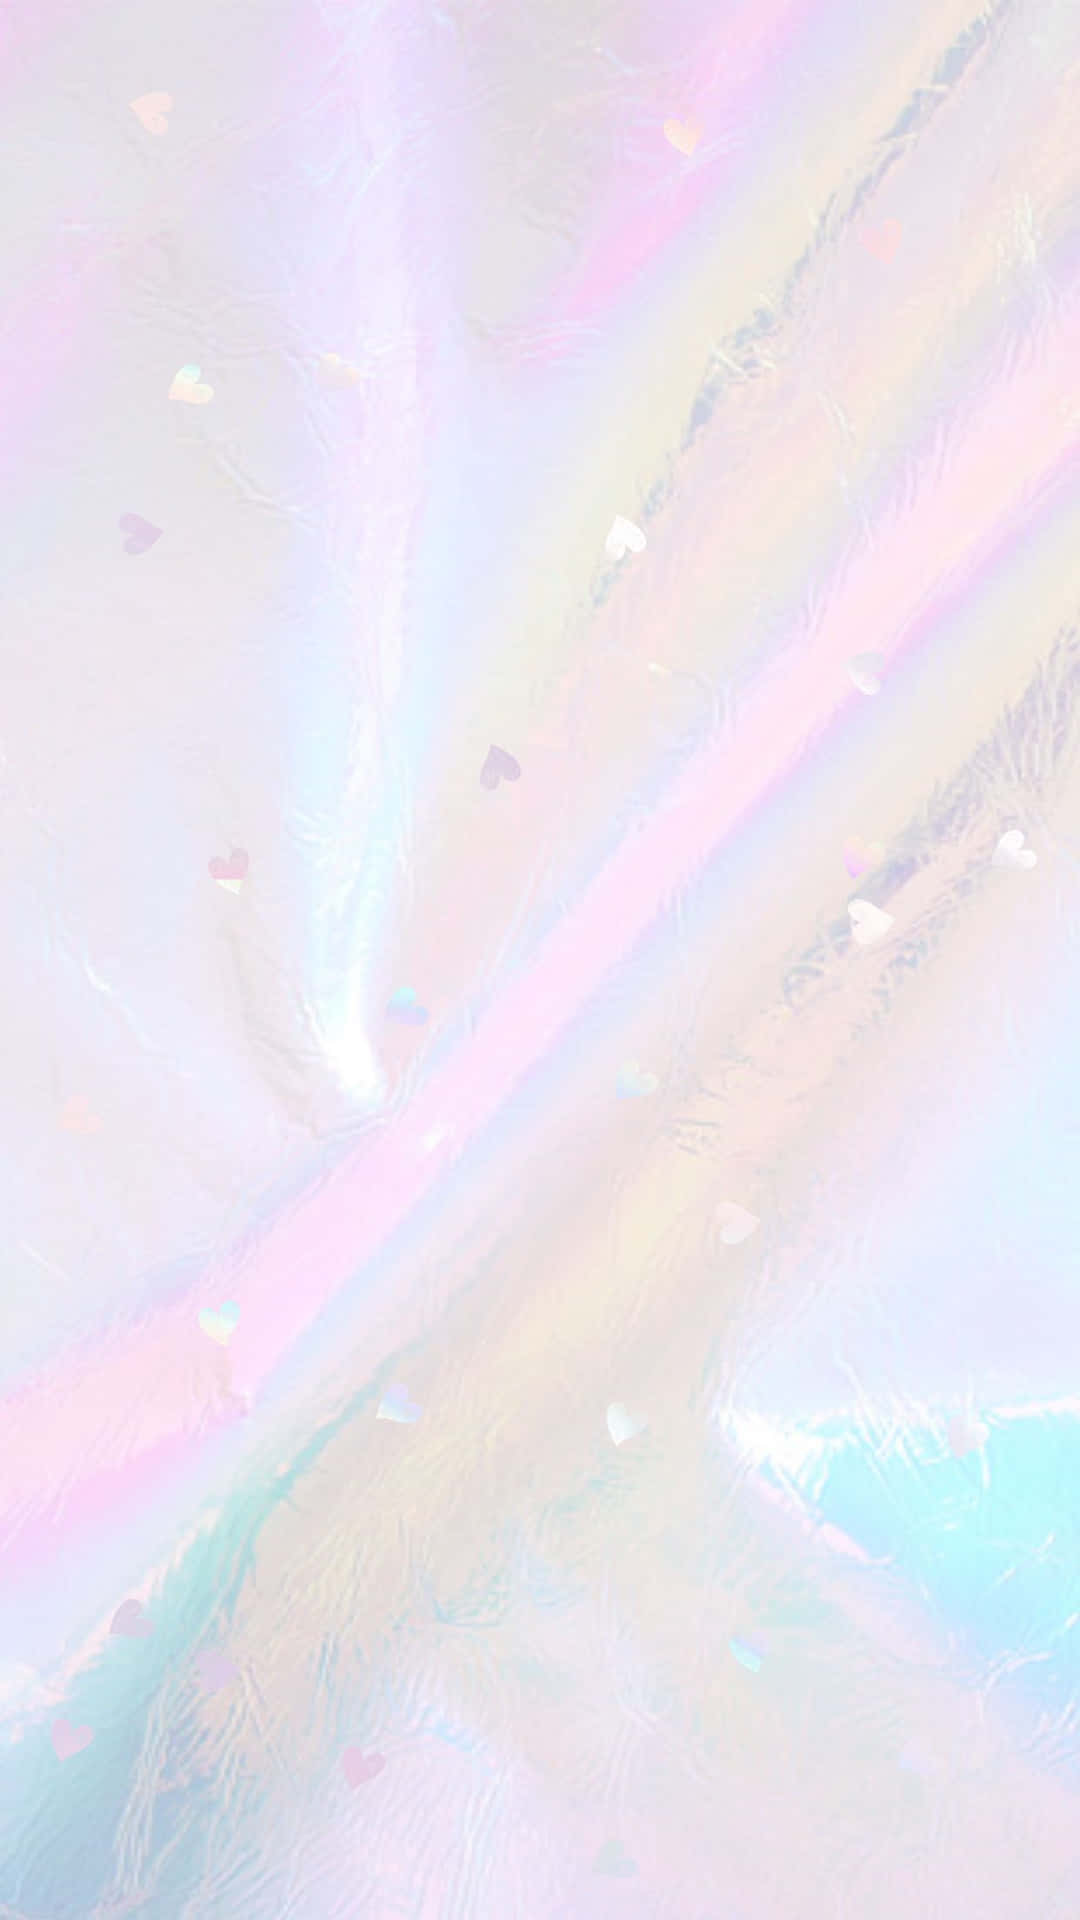 Iphone wallpaper holographic aesthetic pastel rainbow - Holographic